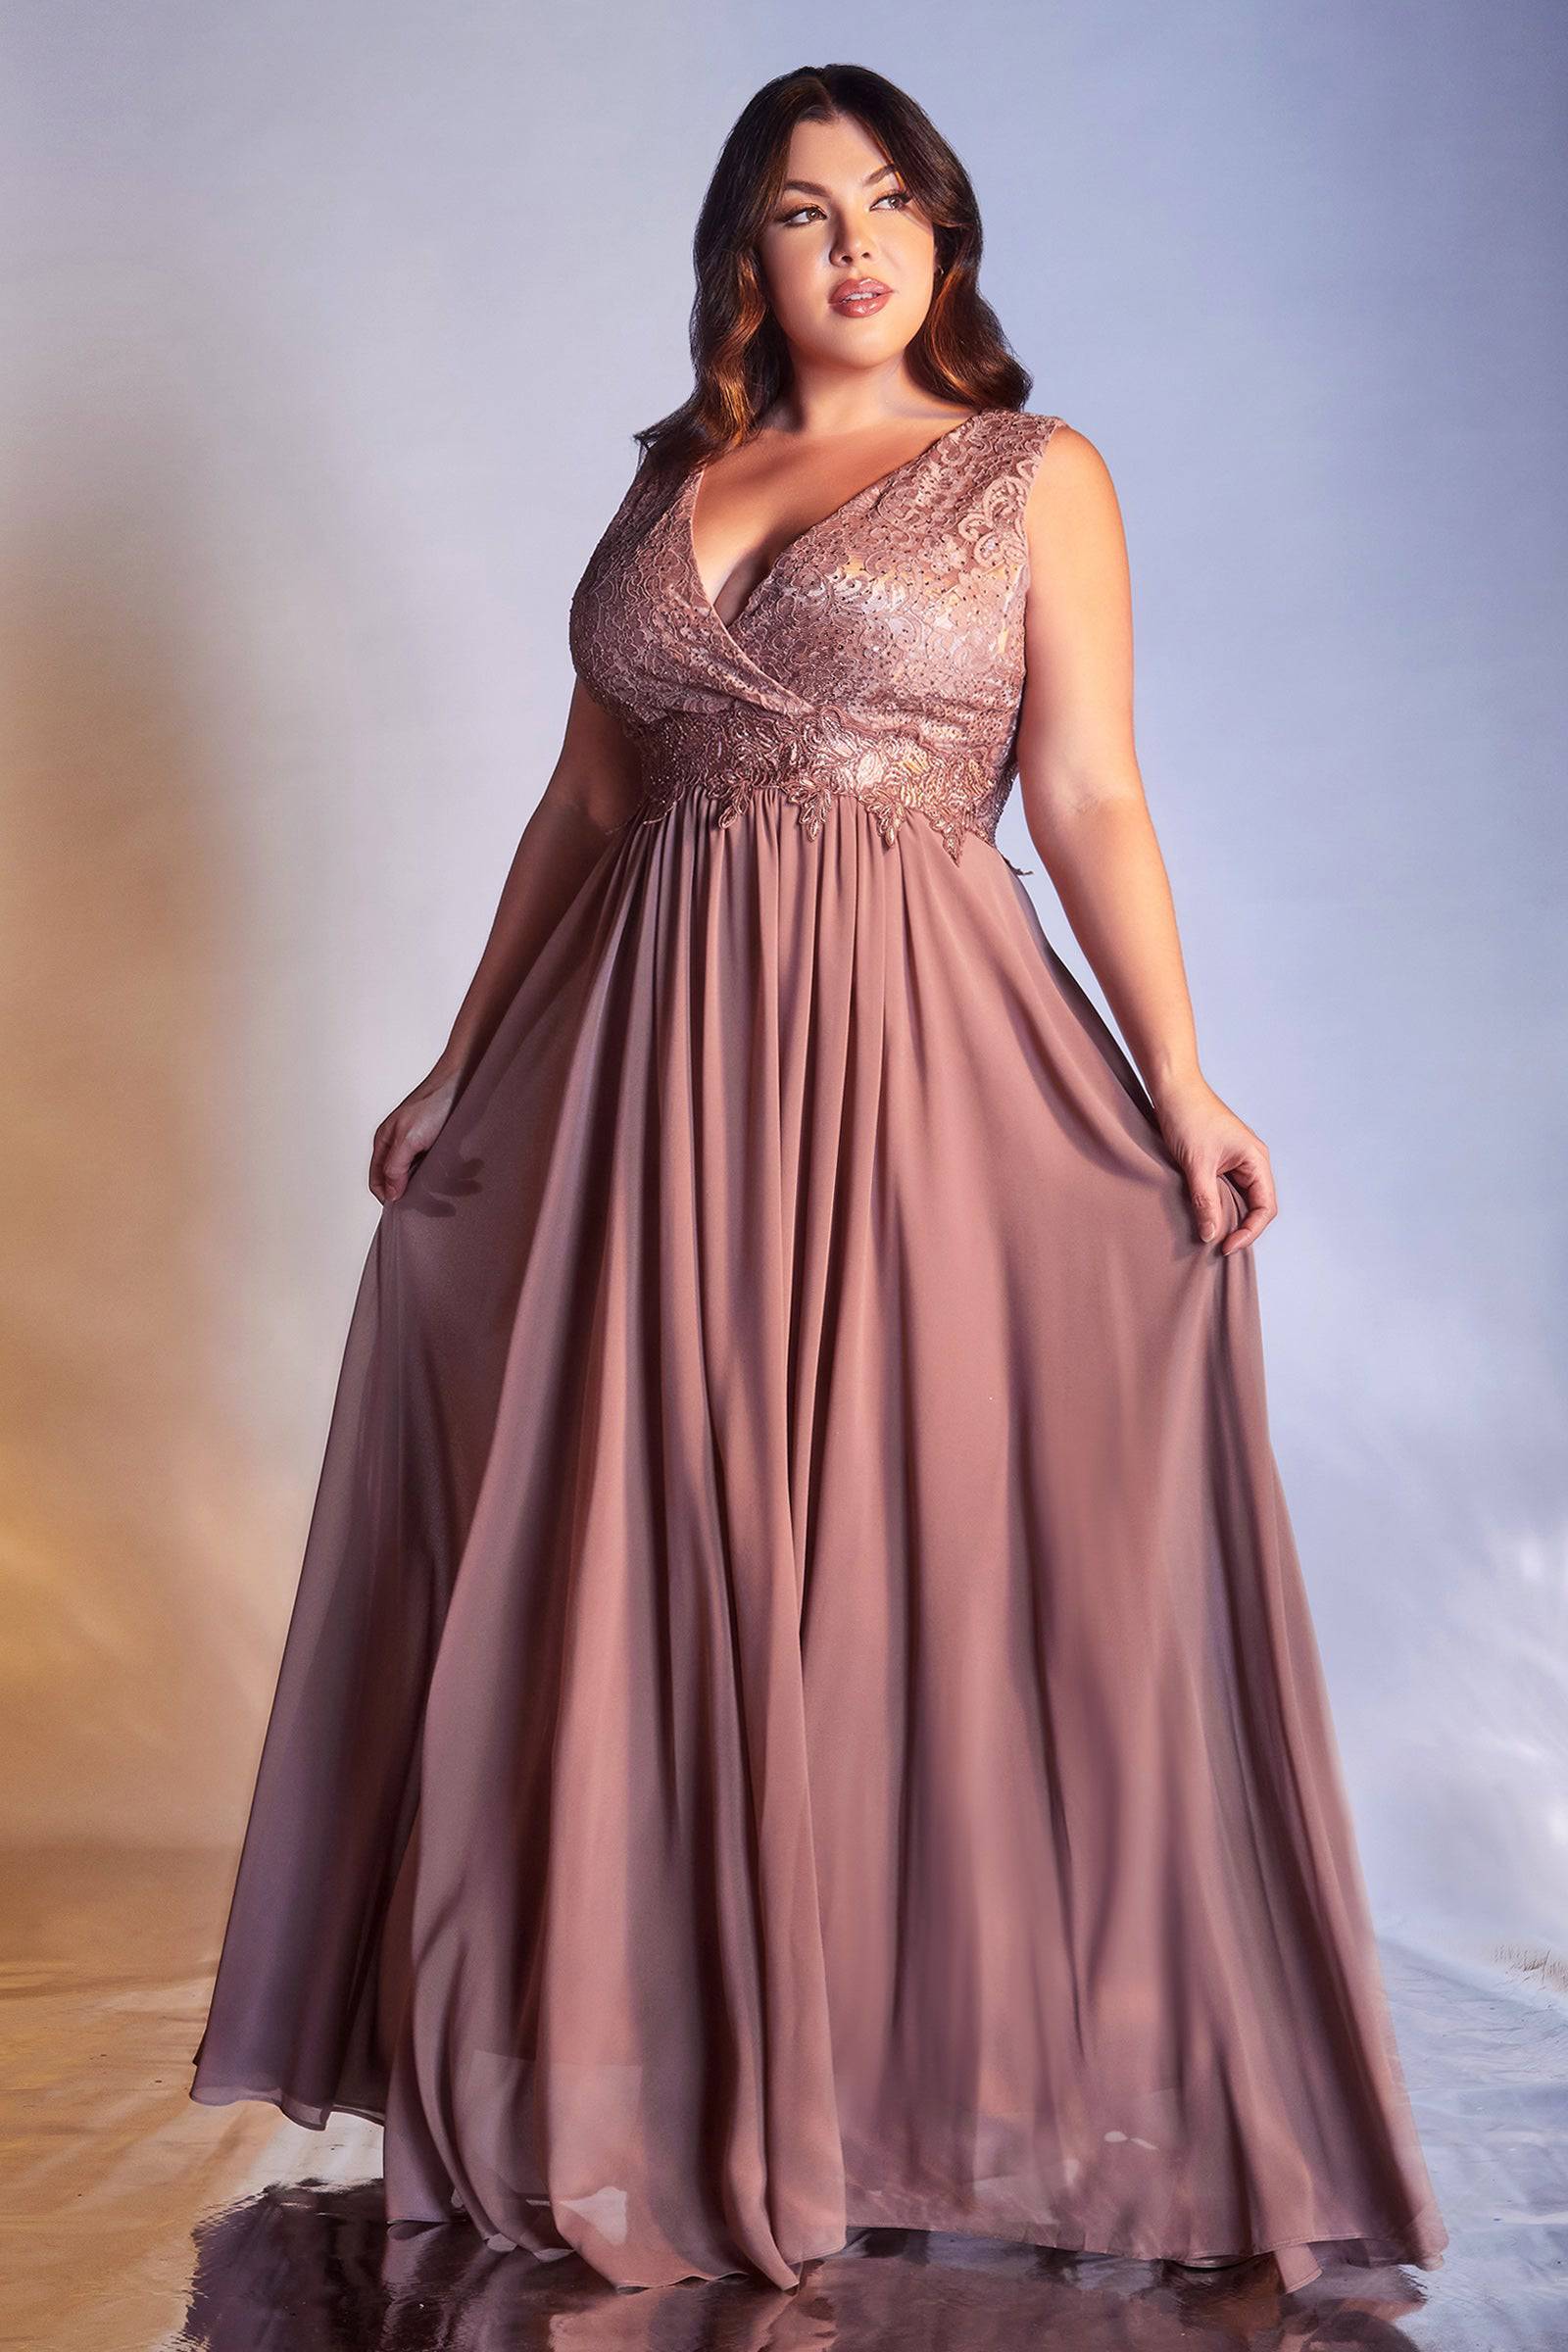 Opulent Plus Size Gown with Embroidered Bodice and Long Skirt